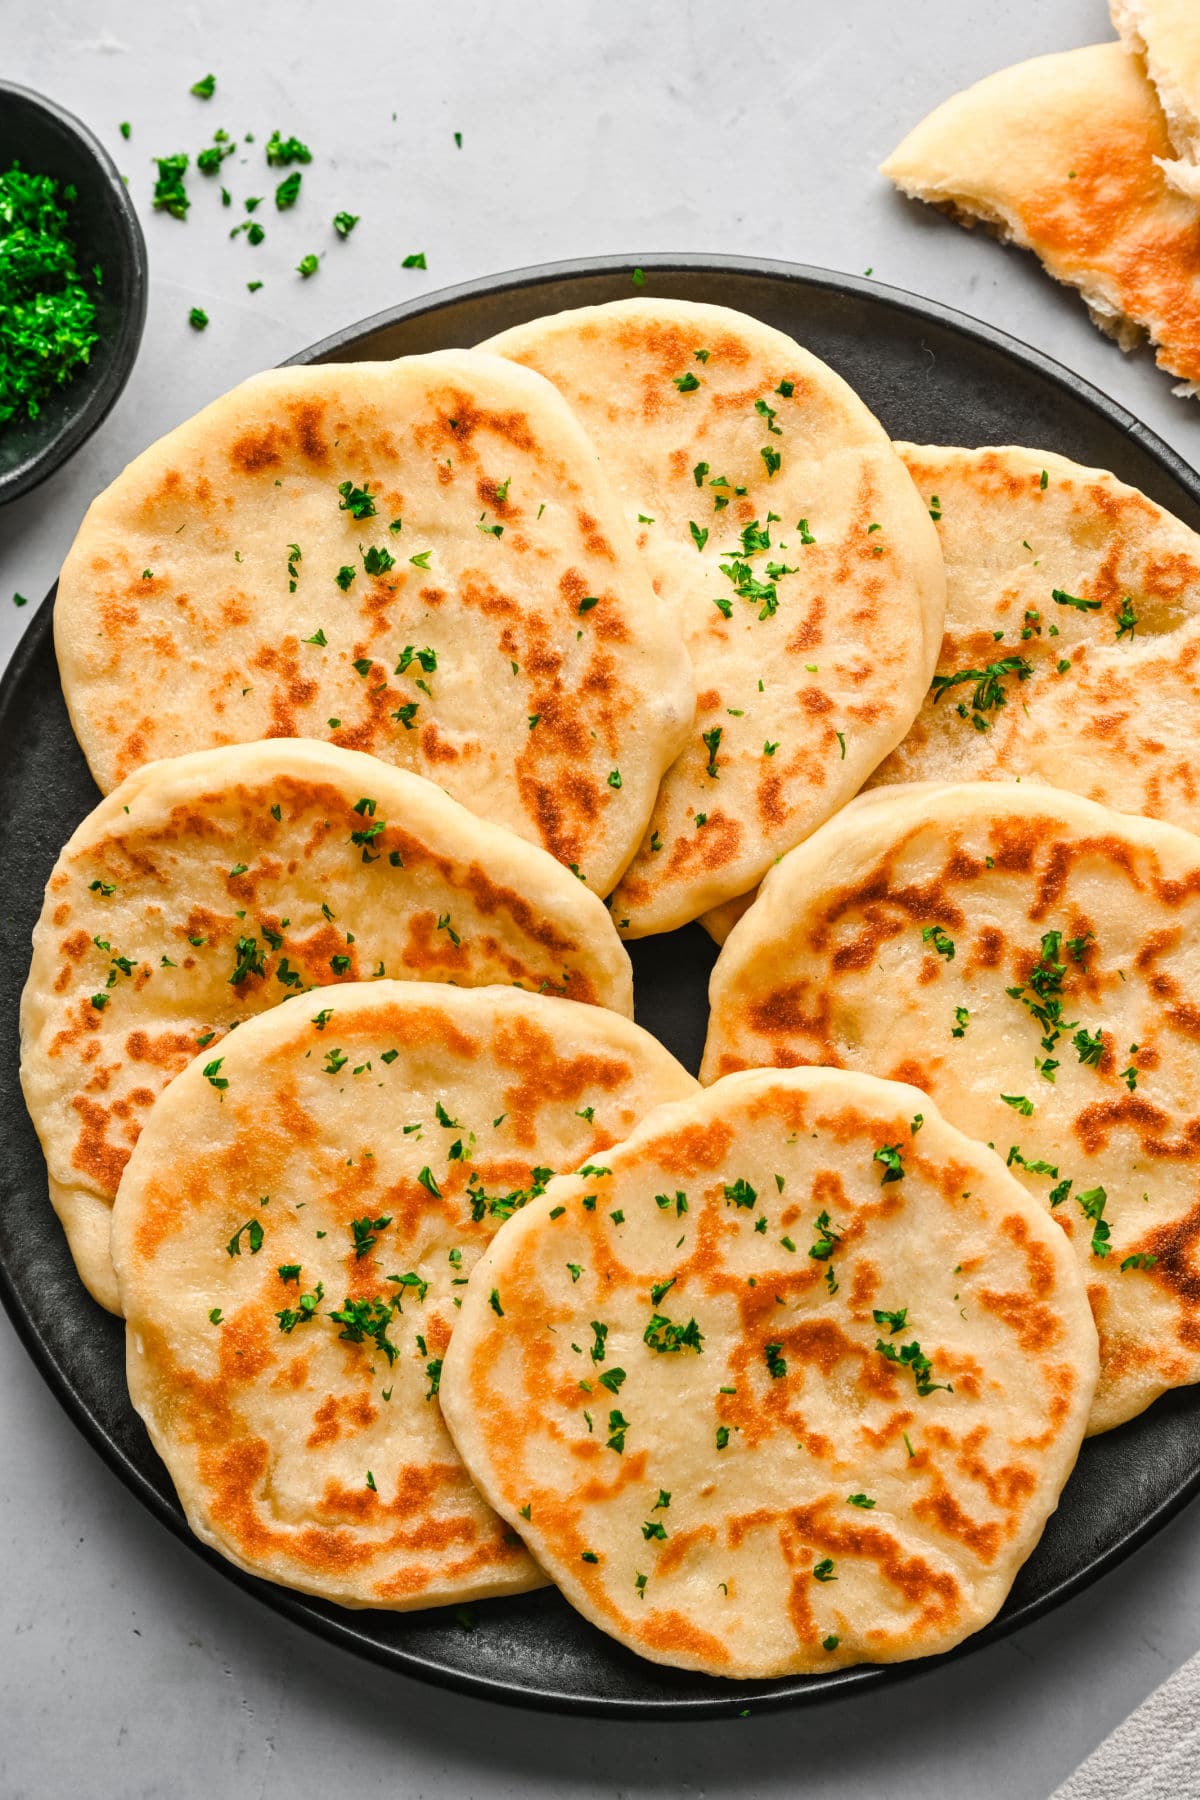 A plate of overlapping flatbreads topped with chopped parsley.